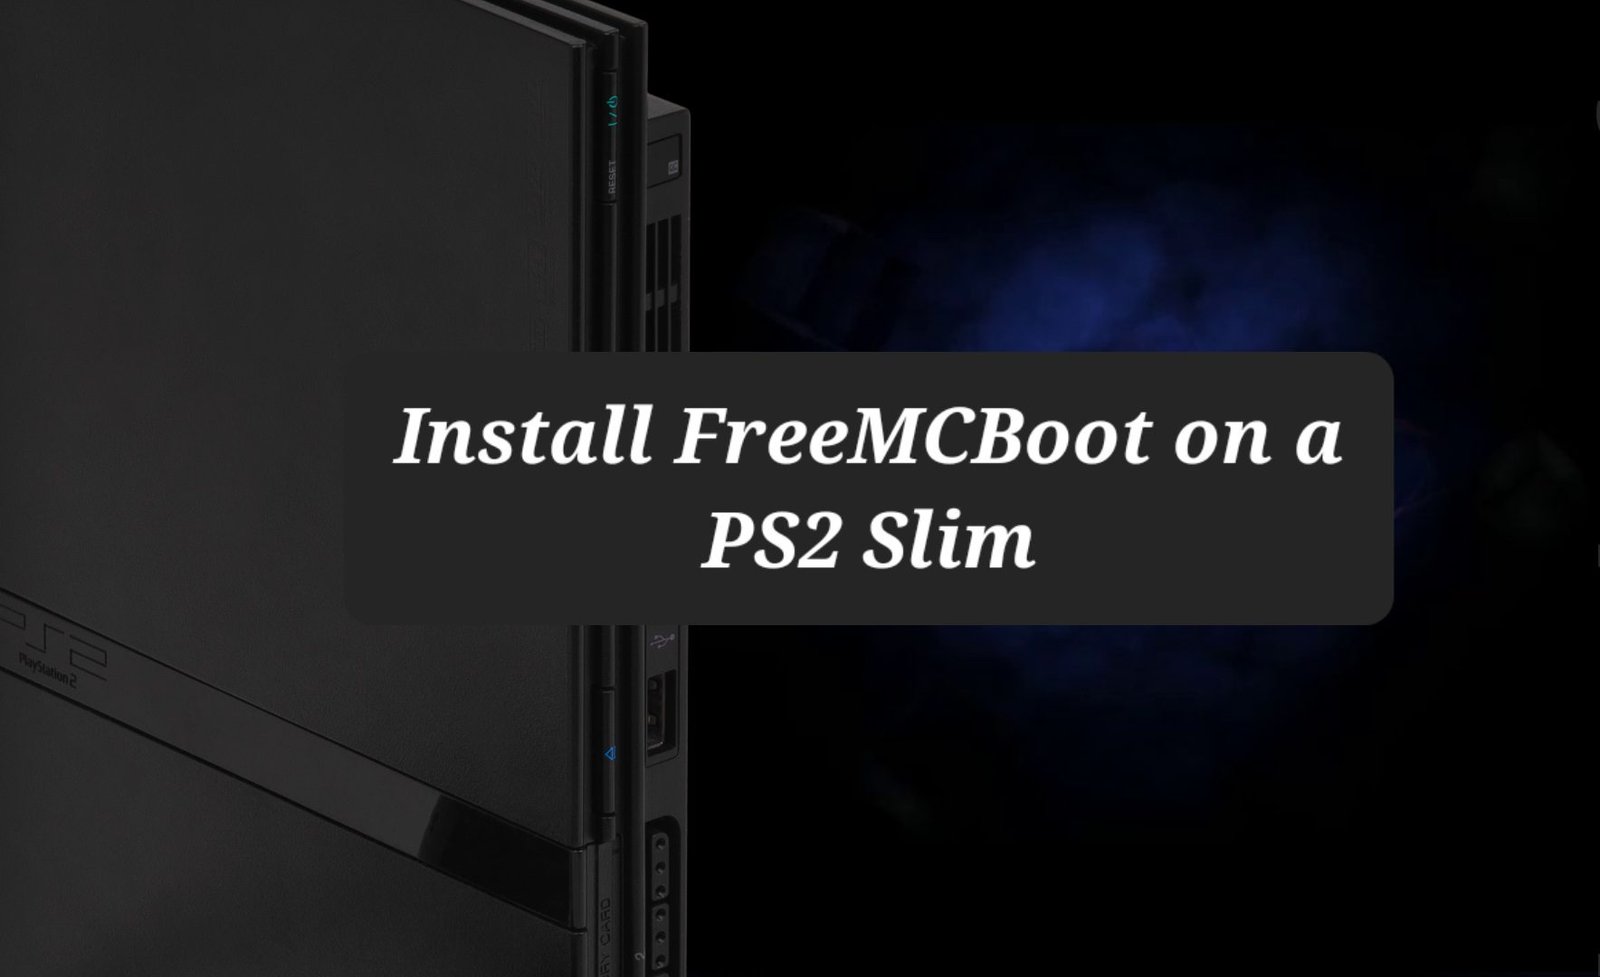 PlayStation 2: install FreeMCBoot on a PS2 Slim with FreeDVDBoot and FunTuna 81